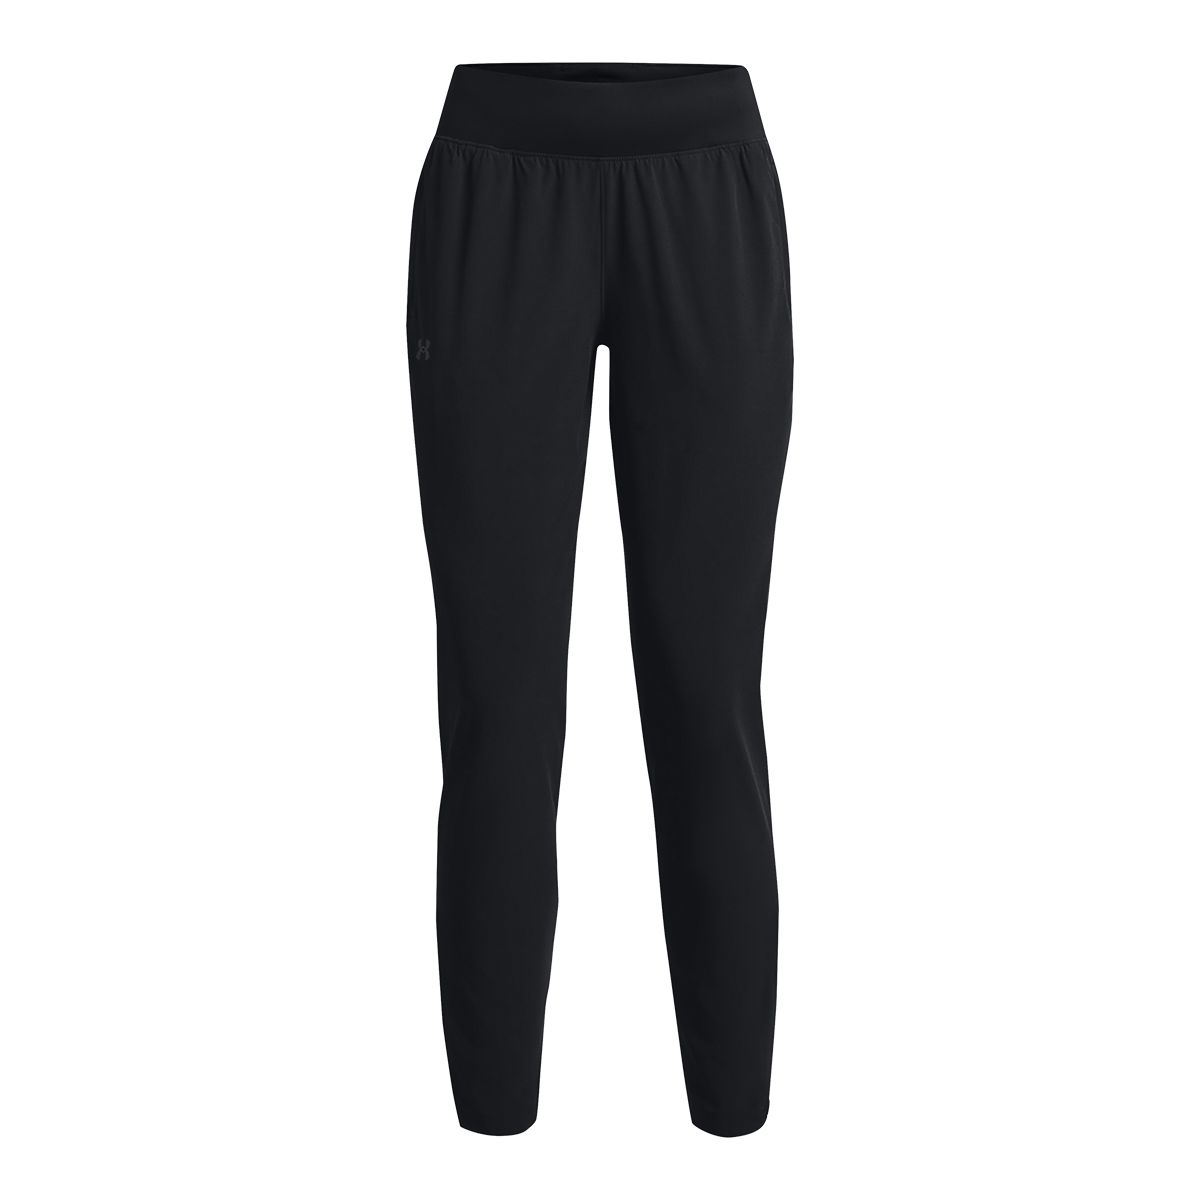 Best For Winter Sports: UA OutRun the Storm Pants